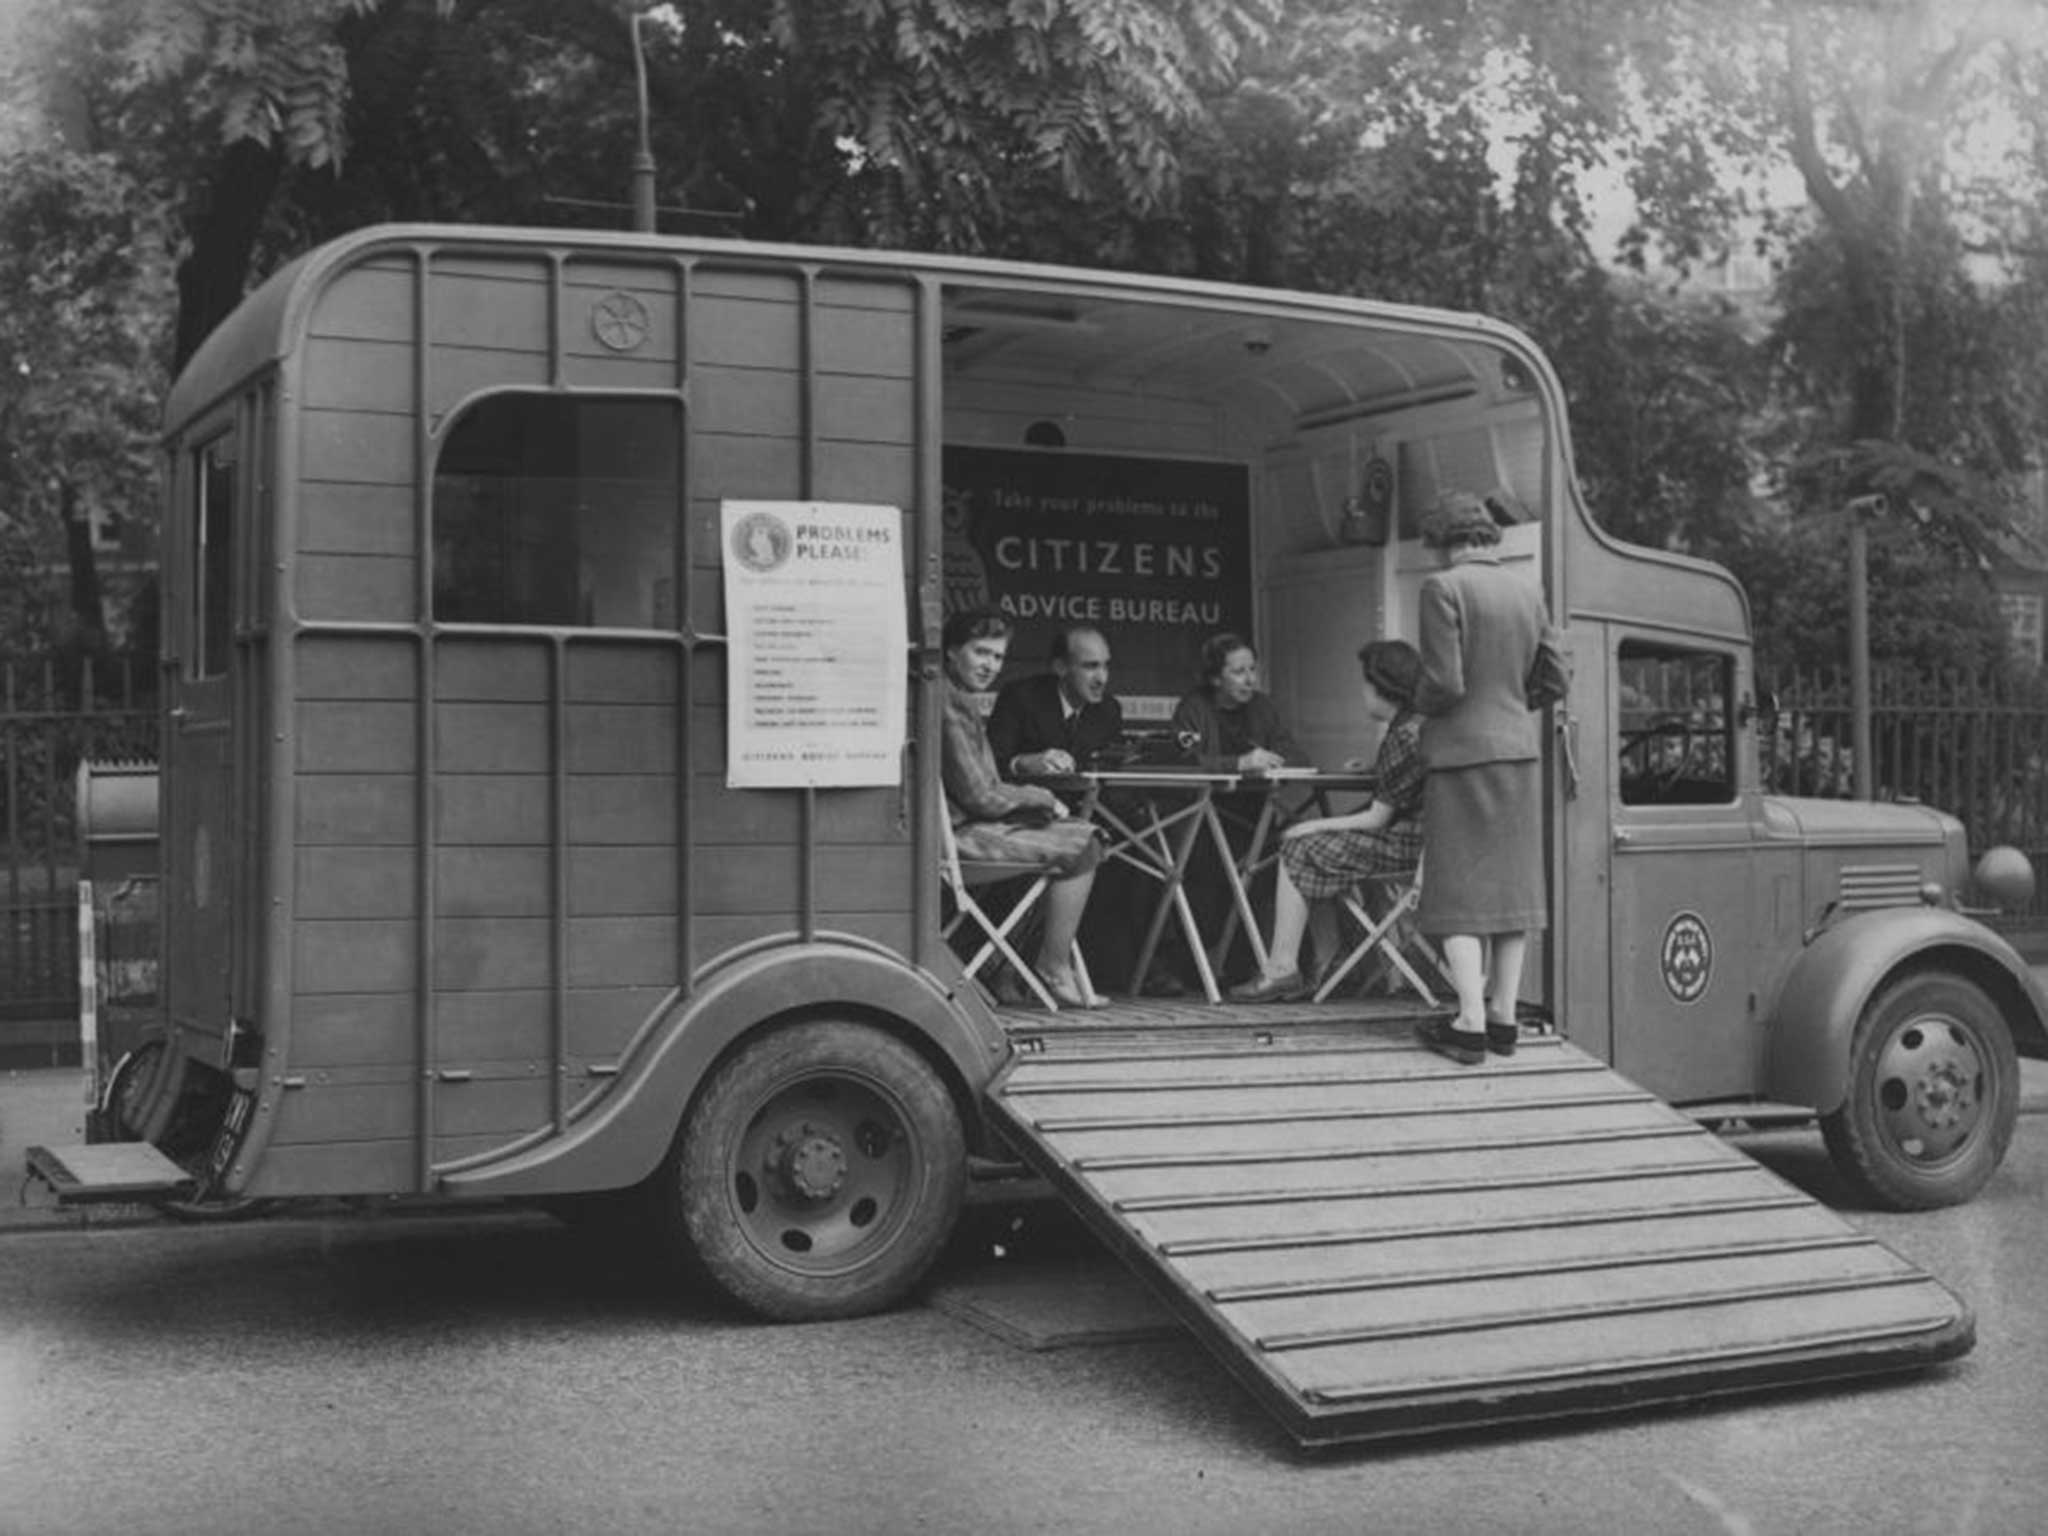 A mobile CAB in 1941